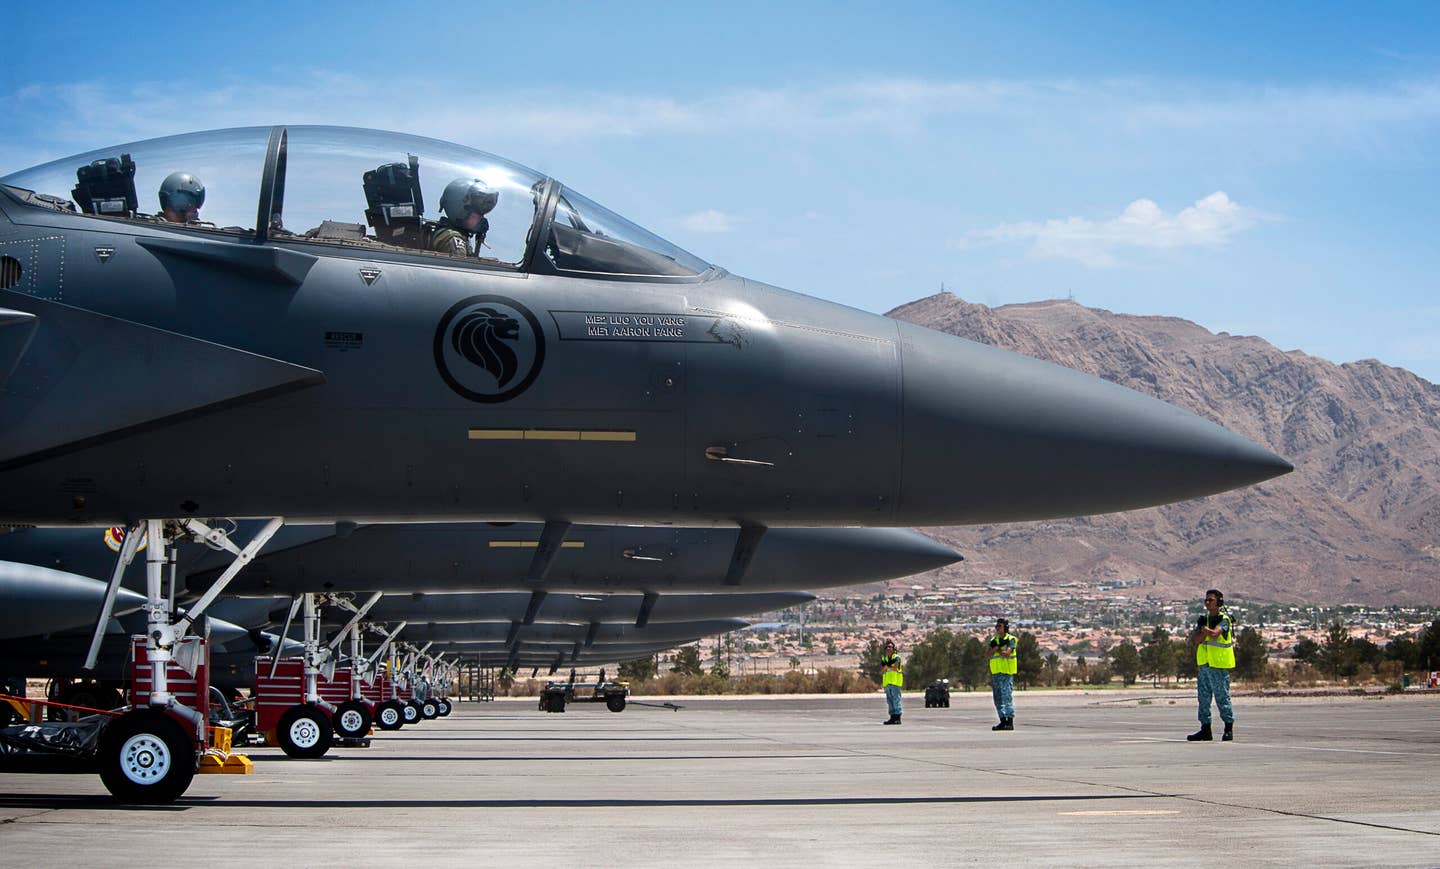 Republic of Singapore Air Force aircrew and crew chiefs prepare to launch three F-15SG aircraft during Red Flag 14-3, in July 2014 at Nellis Air Force Base, Nevada. <em>U.S. Air Force photo by Lawrence Crespo</em>